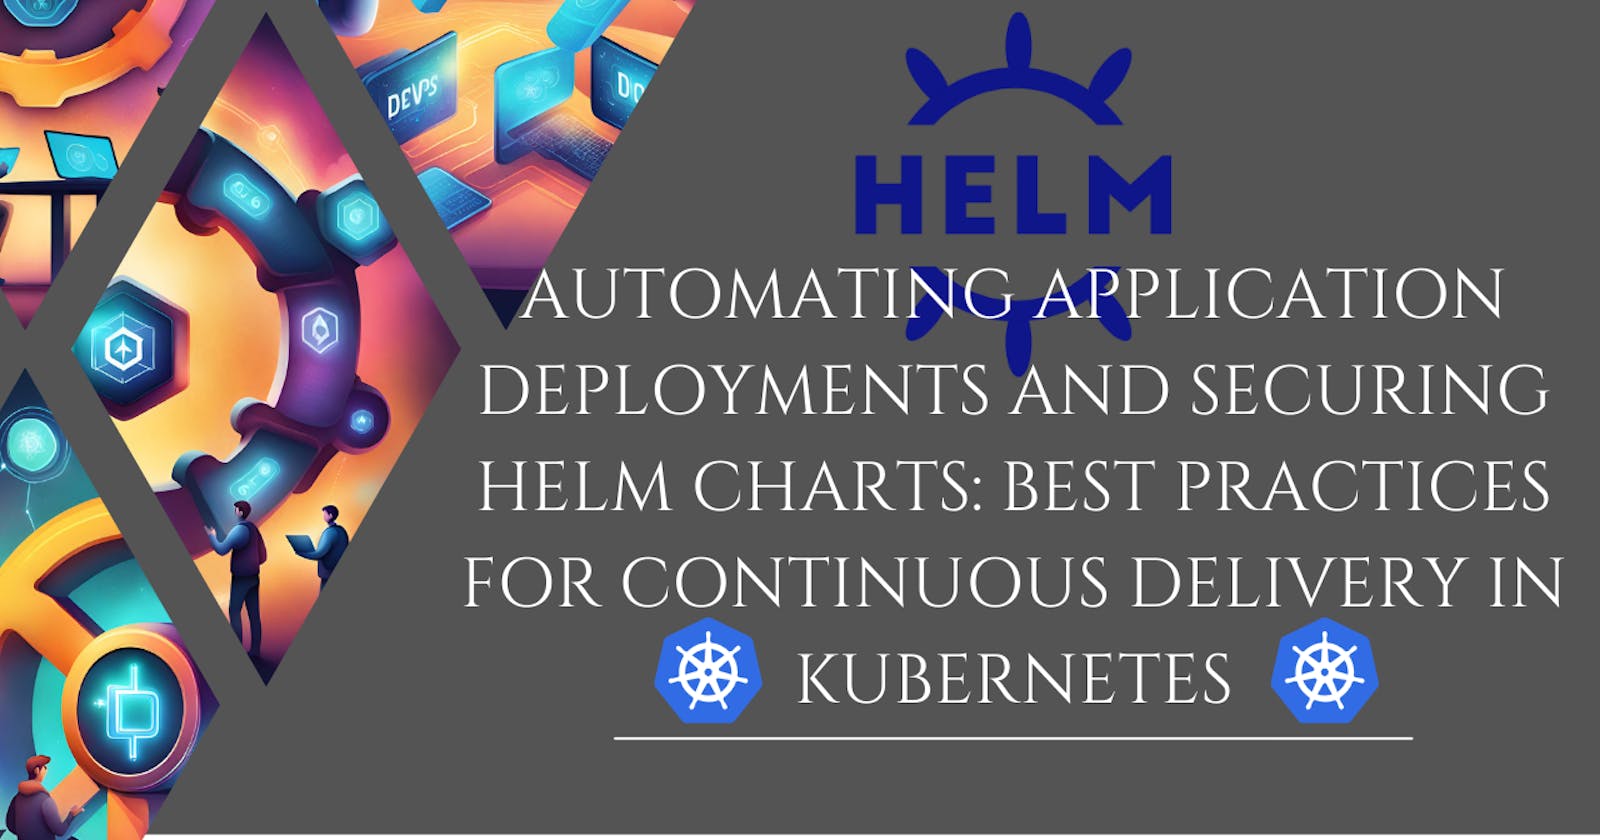 Automating Application Deployments and Securing Helm Charts: Best Practices for Continuous Delivery in Kubernetes